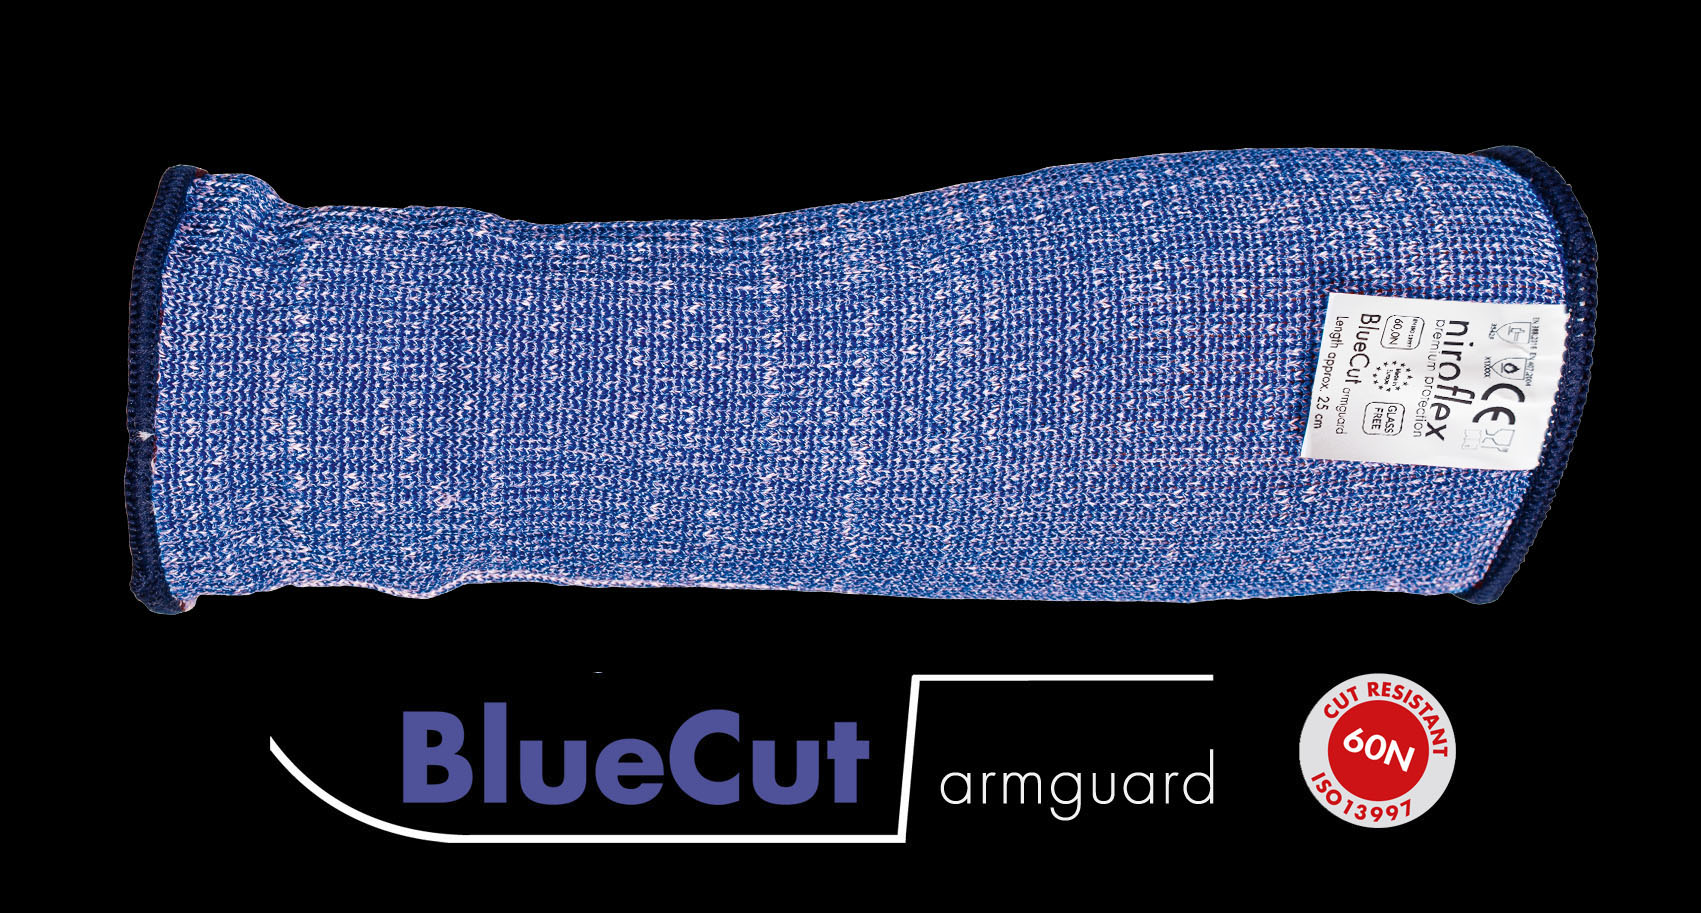 BlueCut advance armguard, Cut resistant gloves, stainless steel glove